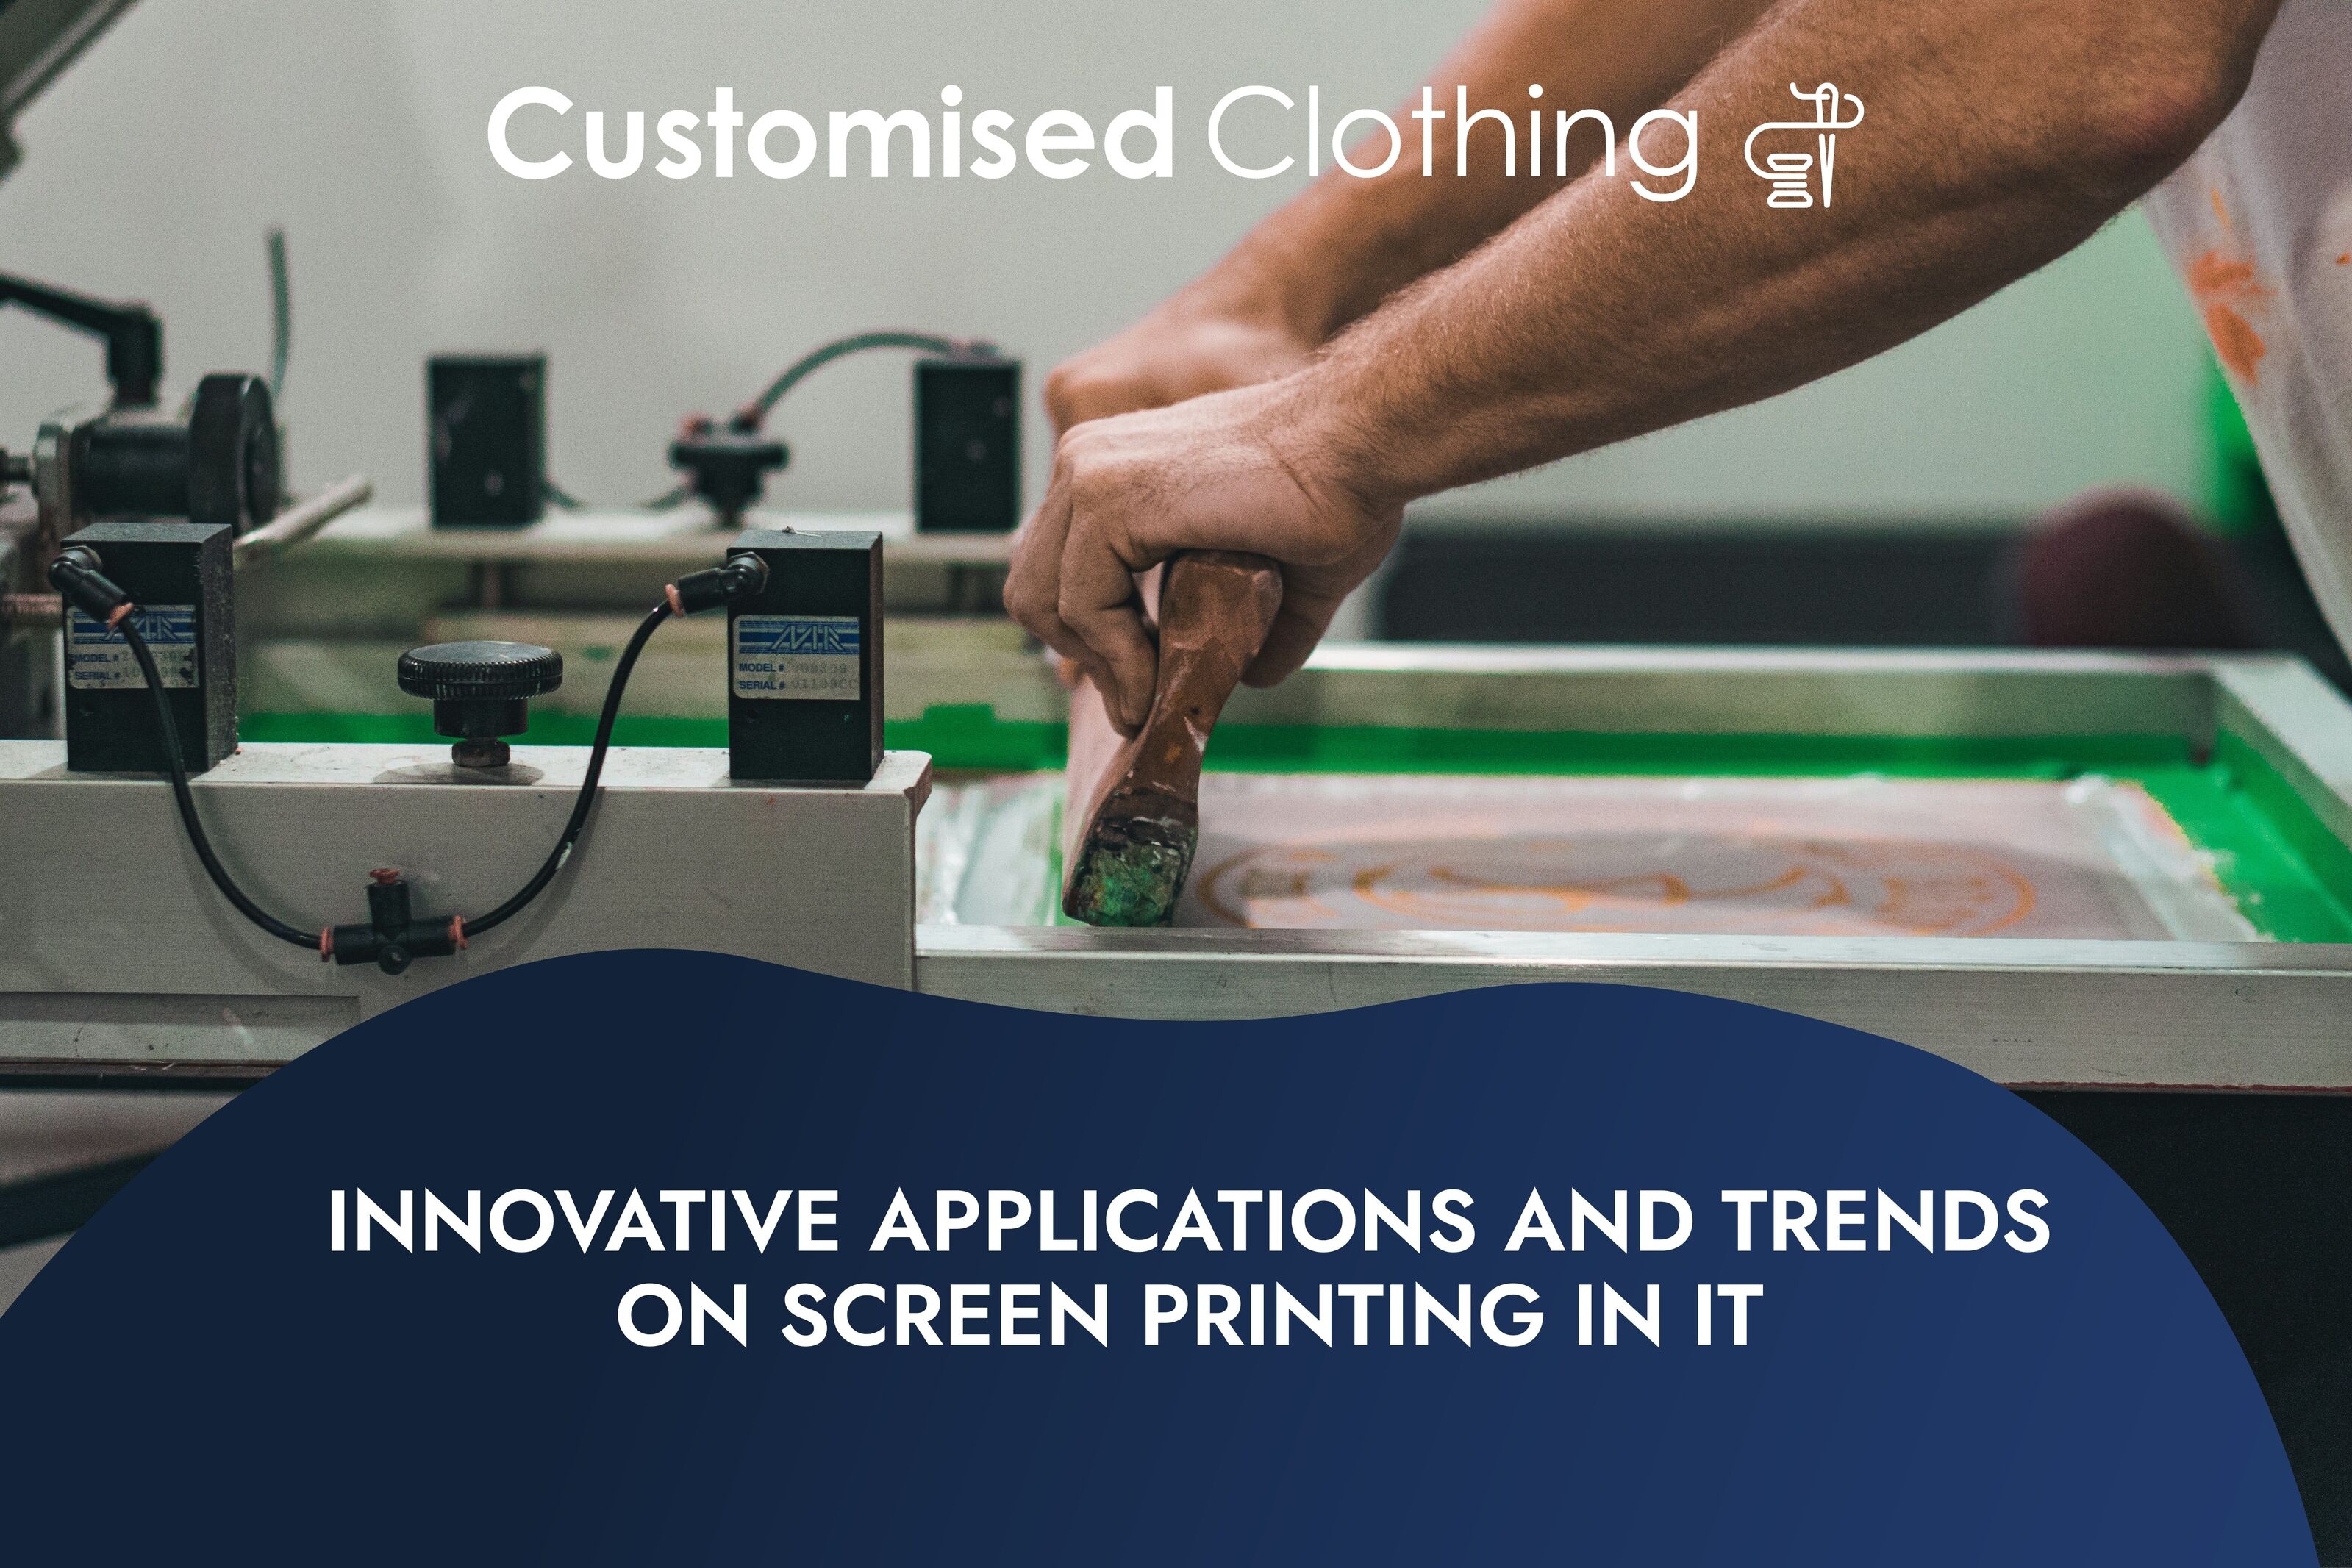 Innovative Applications and Trends on Screen Printing in IT